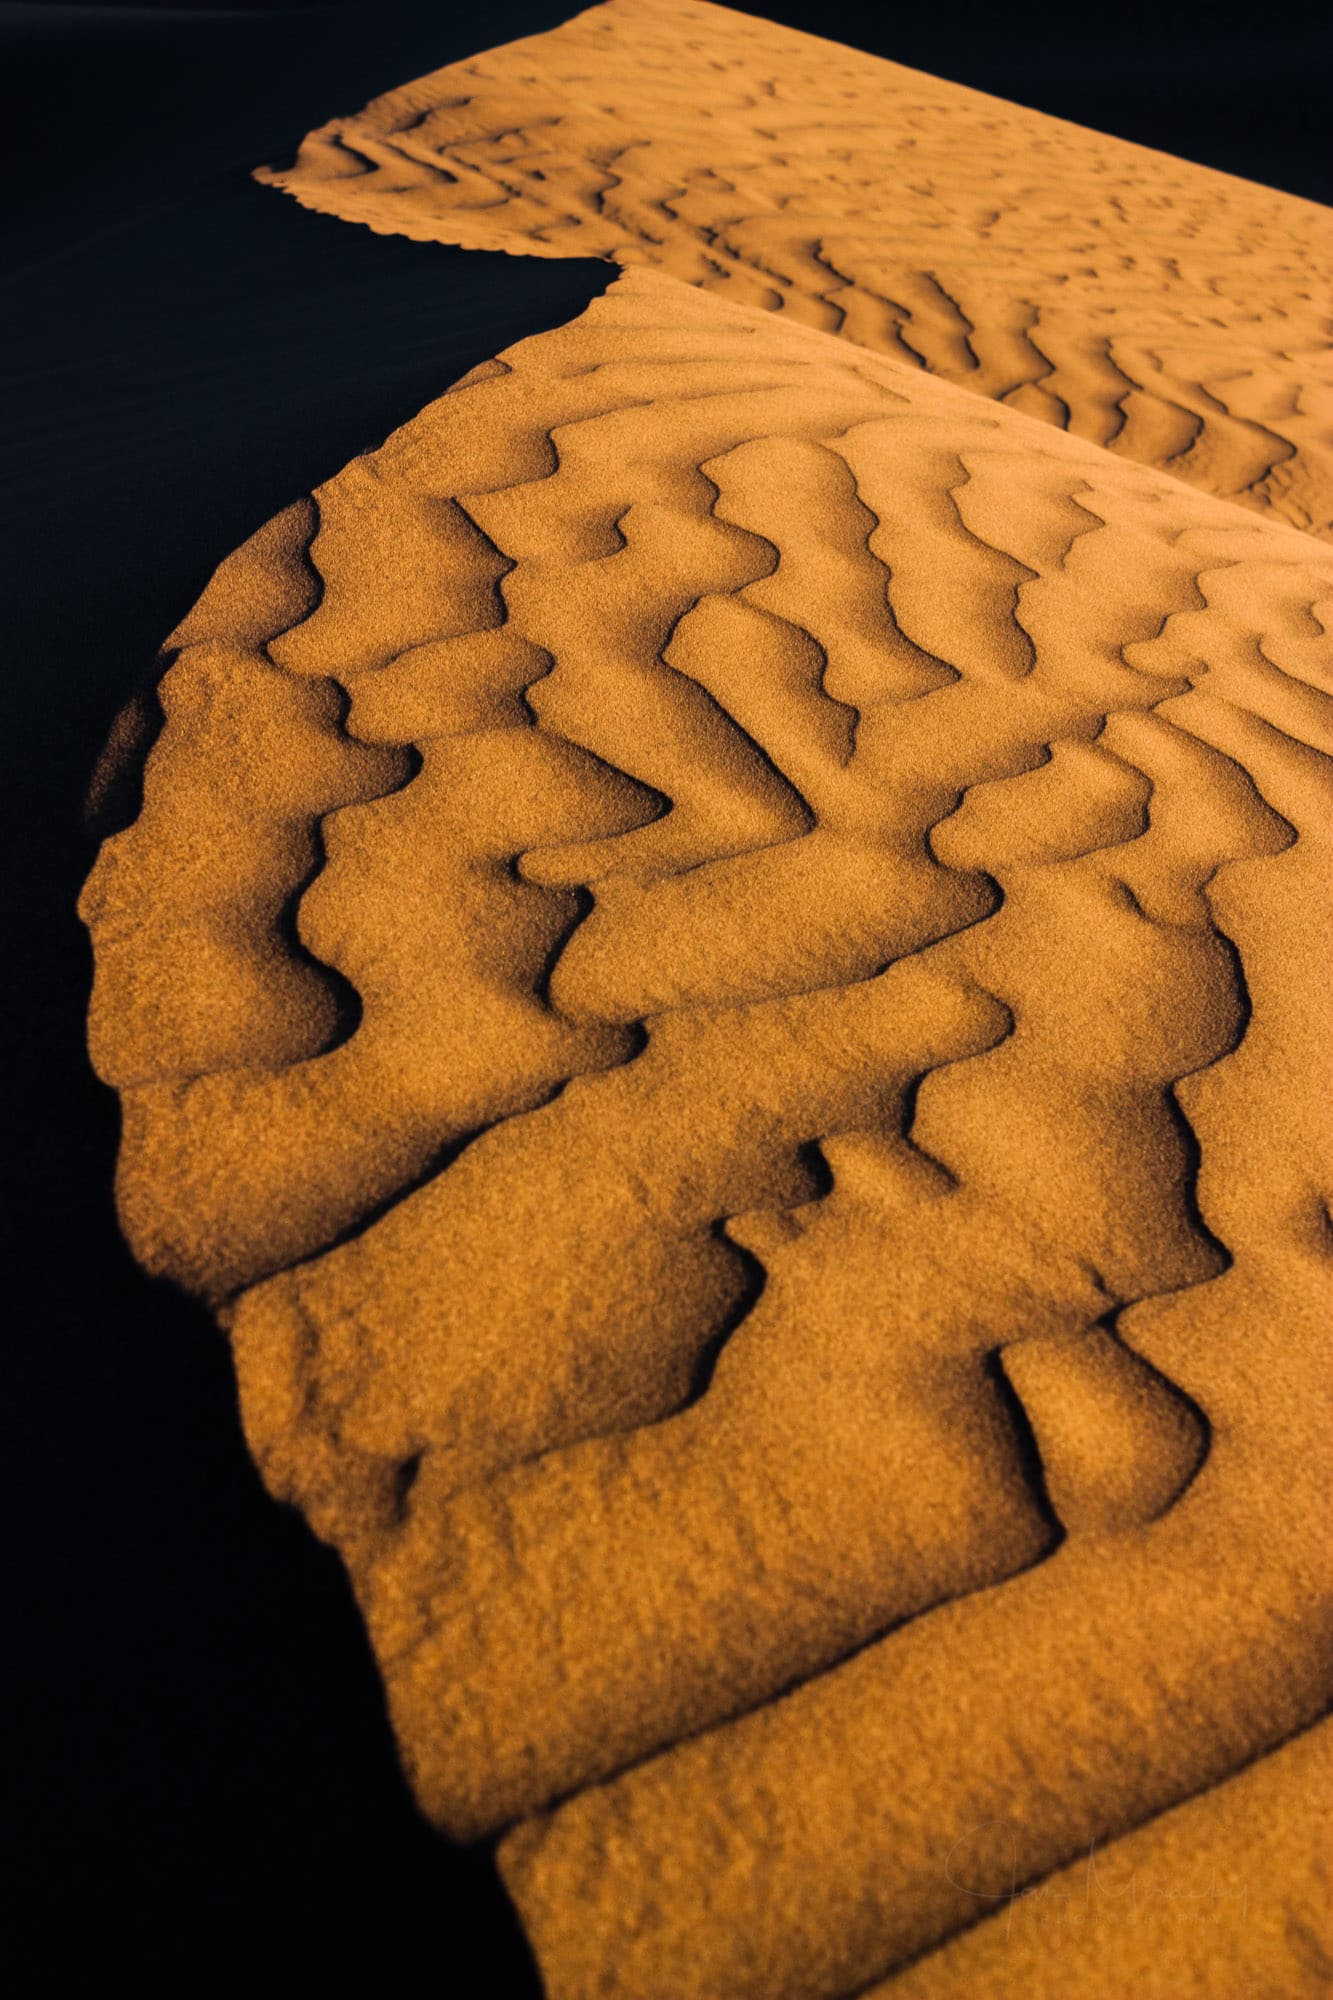 Details of a sand dune at sunset